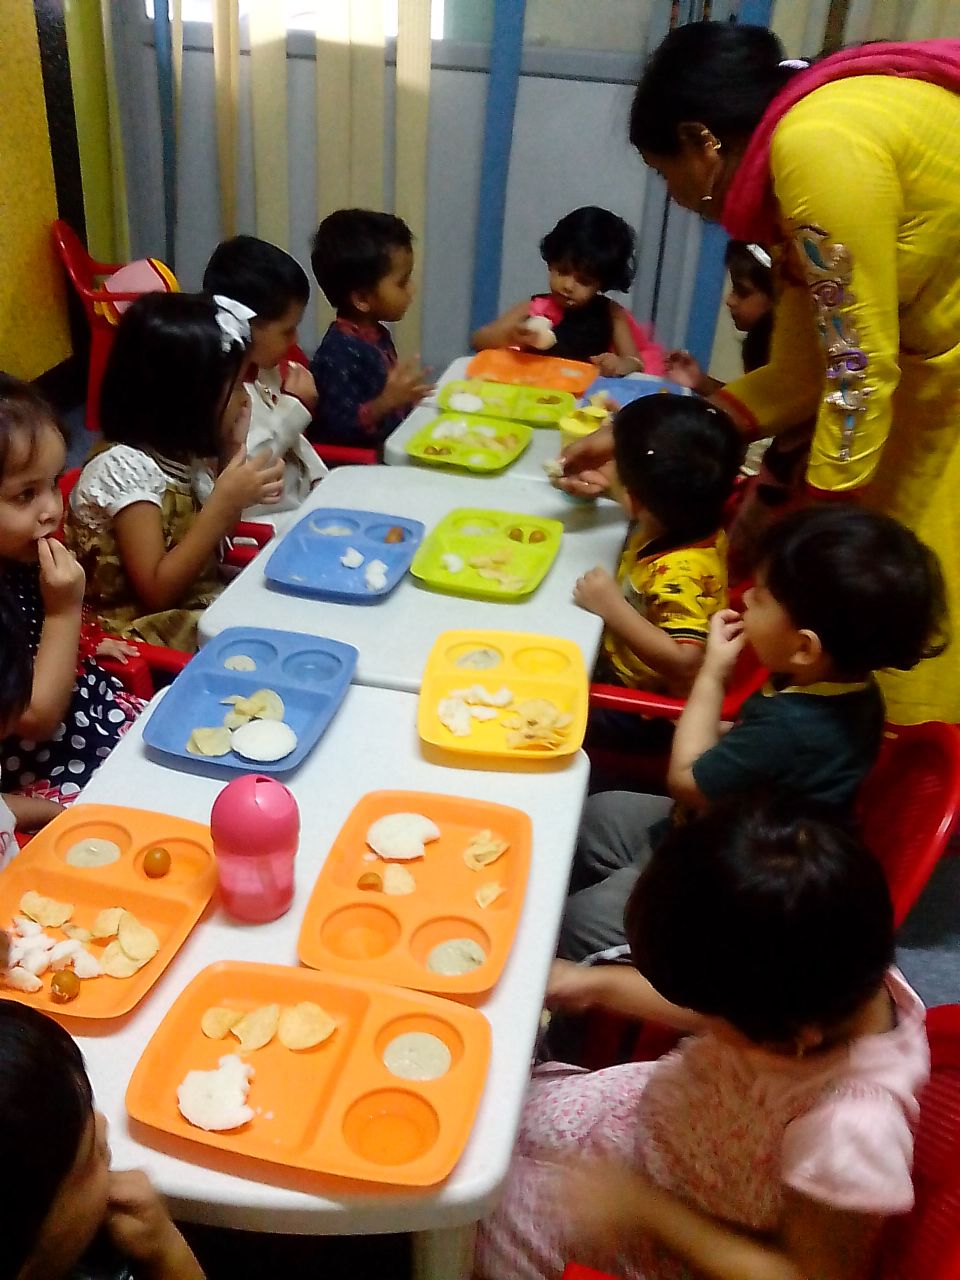 DAYCARE AND PRESCHOOL | STEP UP KIDS DAY CARE & PRESCHOOL | DAYCARE IN PIMPLE NILAKH, DAY CARE IN PIMPLE NILAKH, BEST DAYCARE IN PIMPLE NILAKH, DAYCARE PIMPLE NILAKH, PRESCHOOL IN PIMPLE NILAKH, BEST PRESCHOOL IN PIMPLE NILAKH, PRESCHOOL PIMPLE NILAKH, BEST. - GL18833